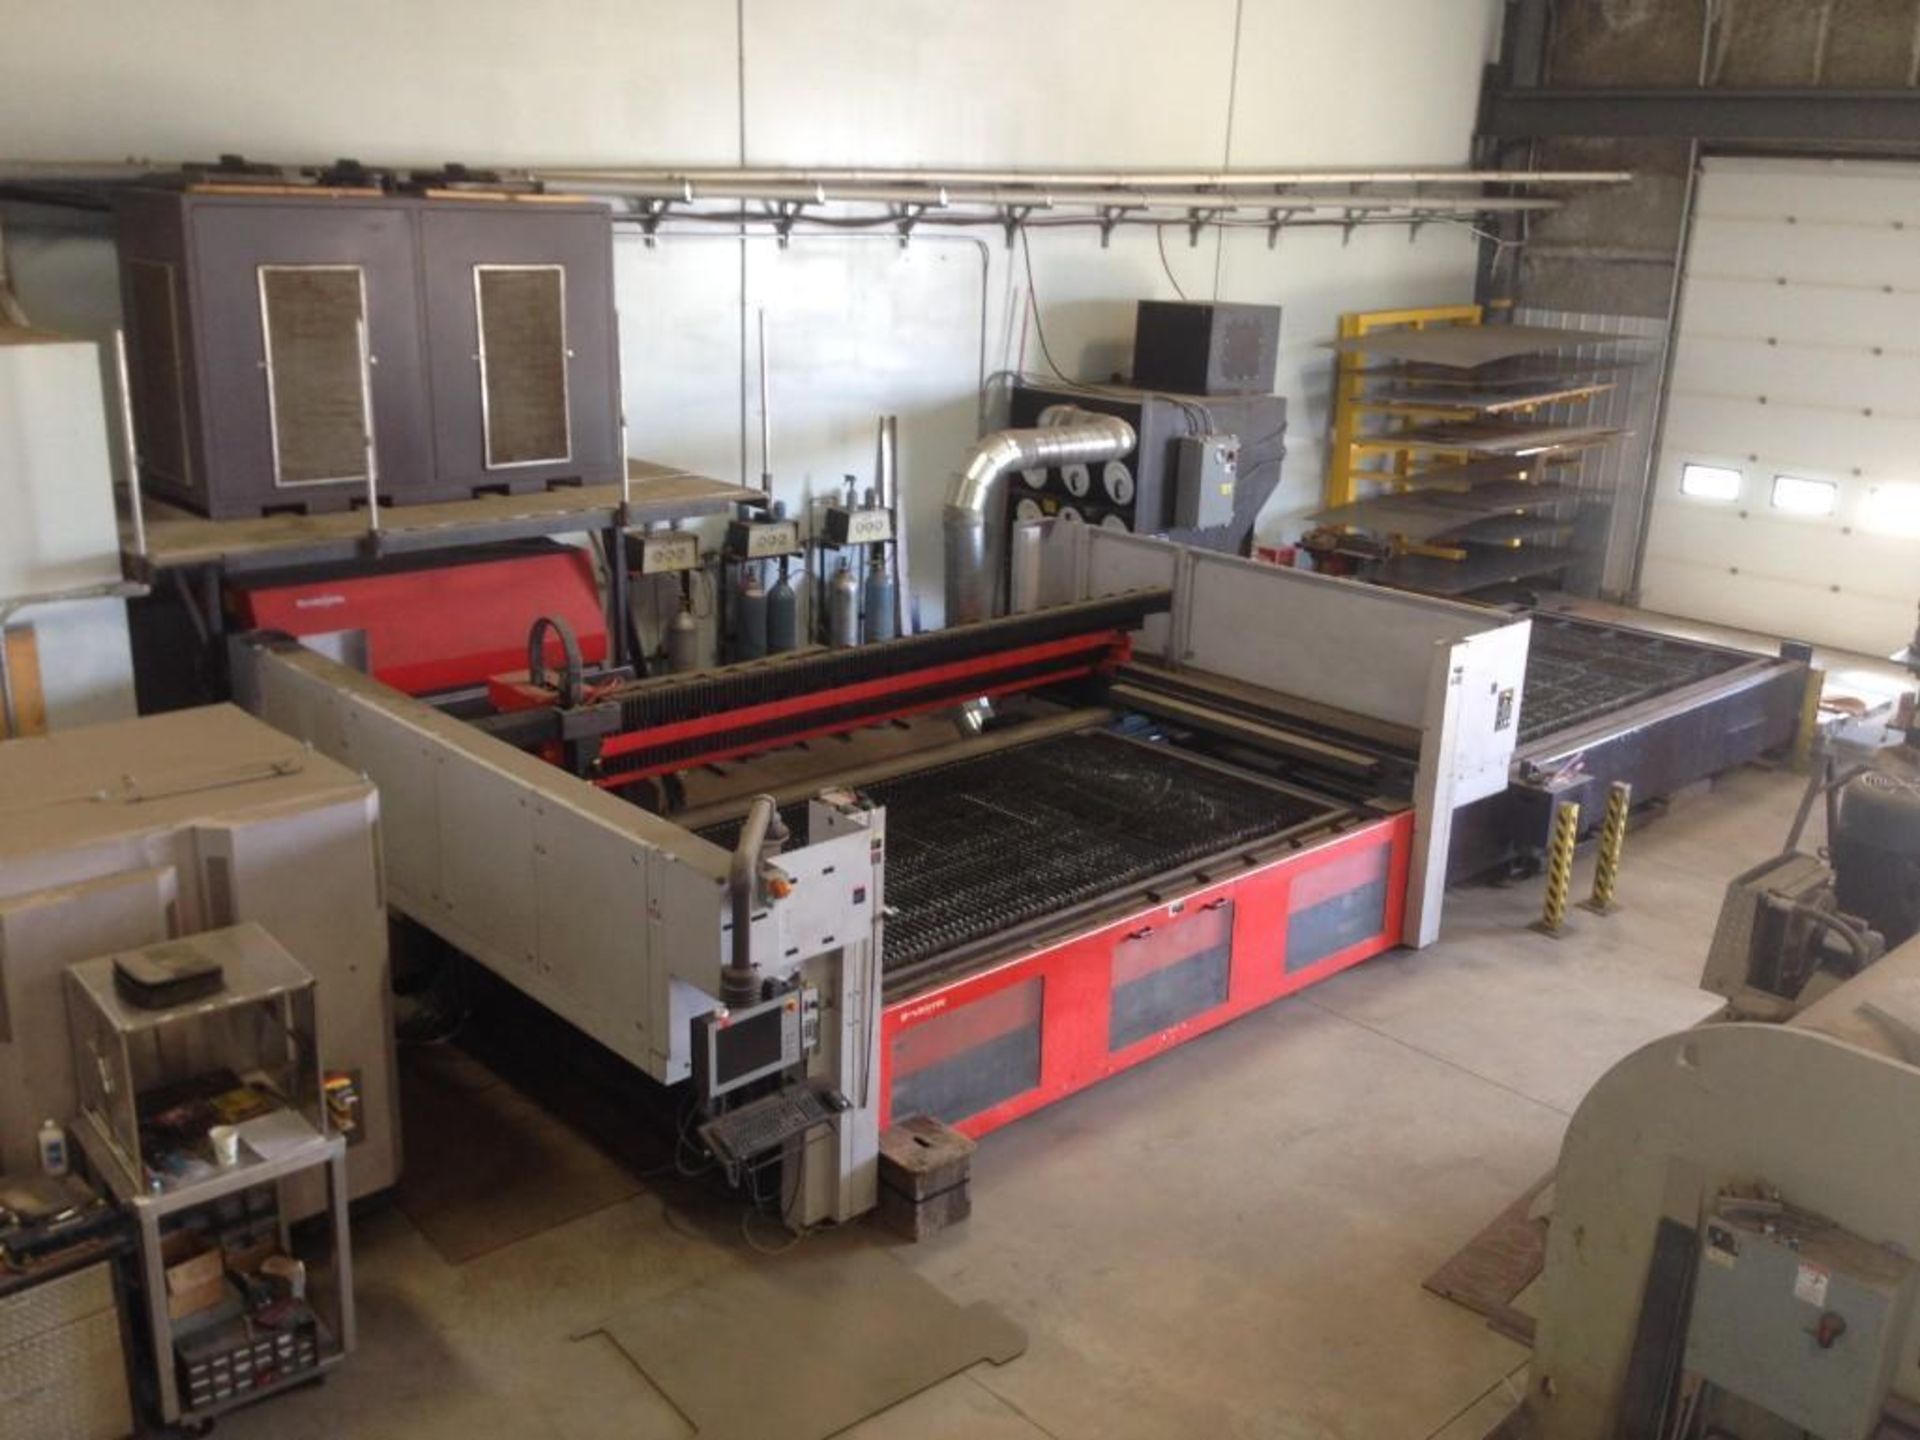 2008 Bystronic Bystar 4020 w/ 2008 ByLaser 6000 Laser Cutting System. Bed Size: 80" x 160" - Image 41 of 45